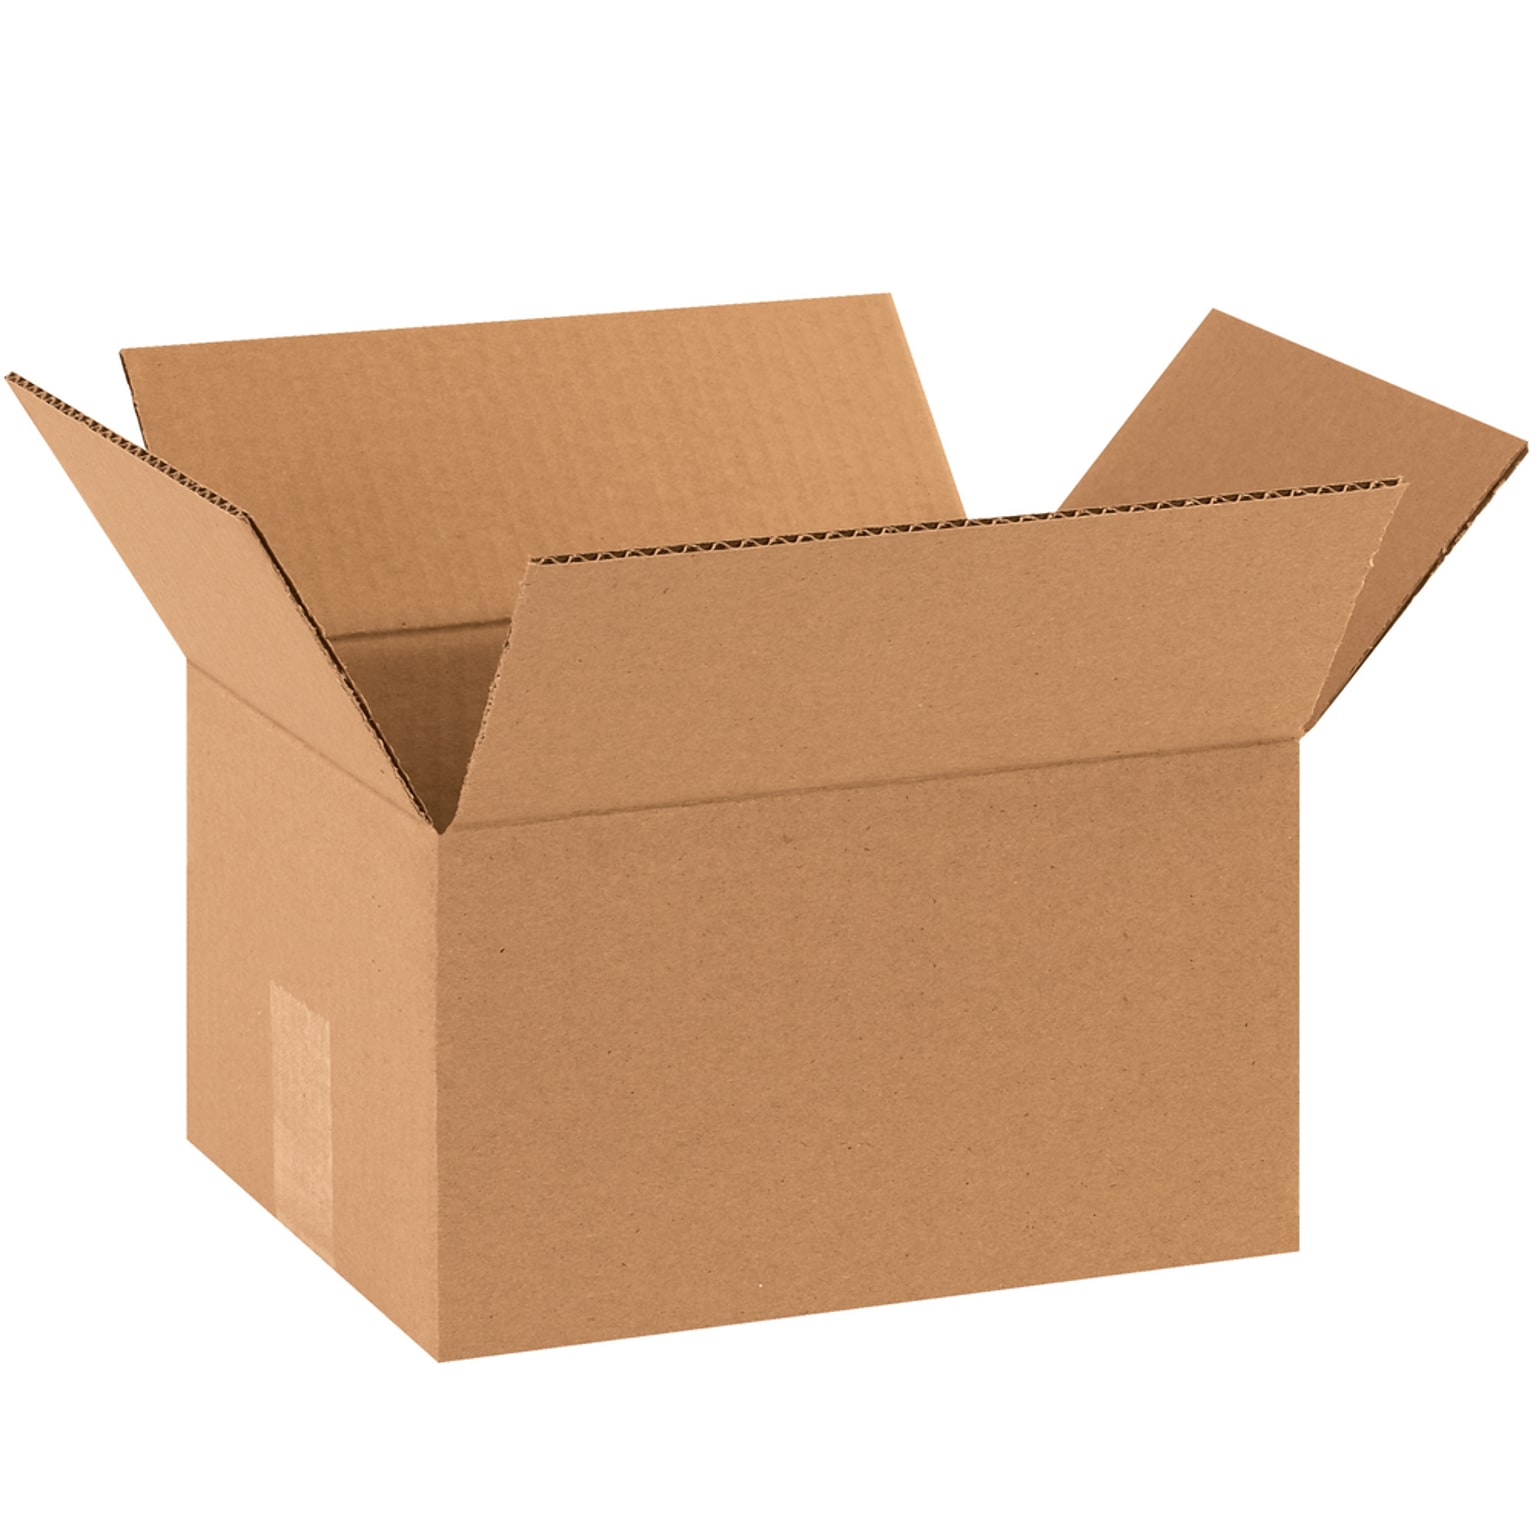 Quill Brand 10 x 8 x 6 Corrugated Shipping Boxes, 200#/ECT-32 Mullen Rated Corrugated, Pack of 25, (1086)